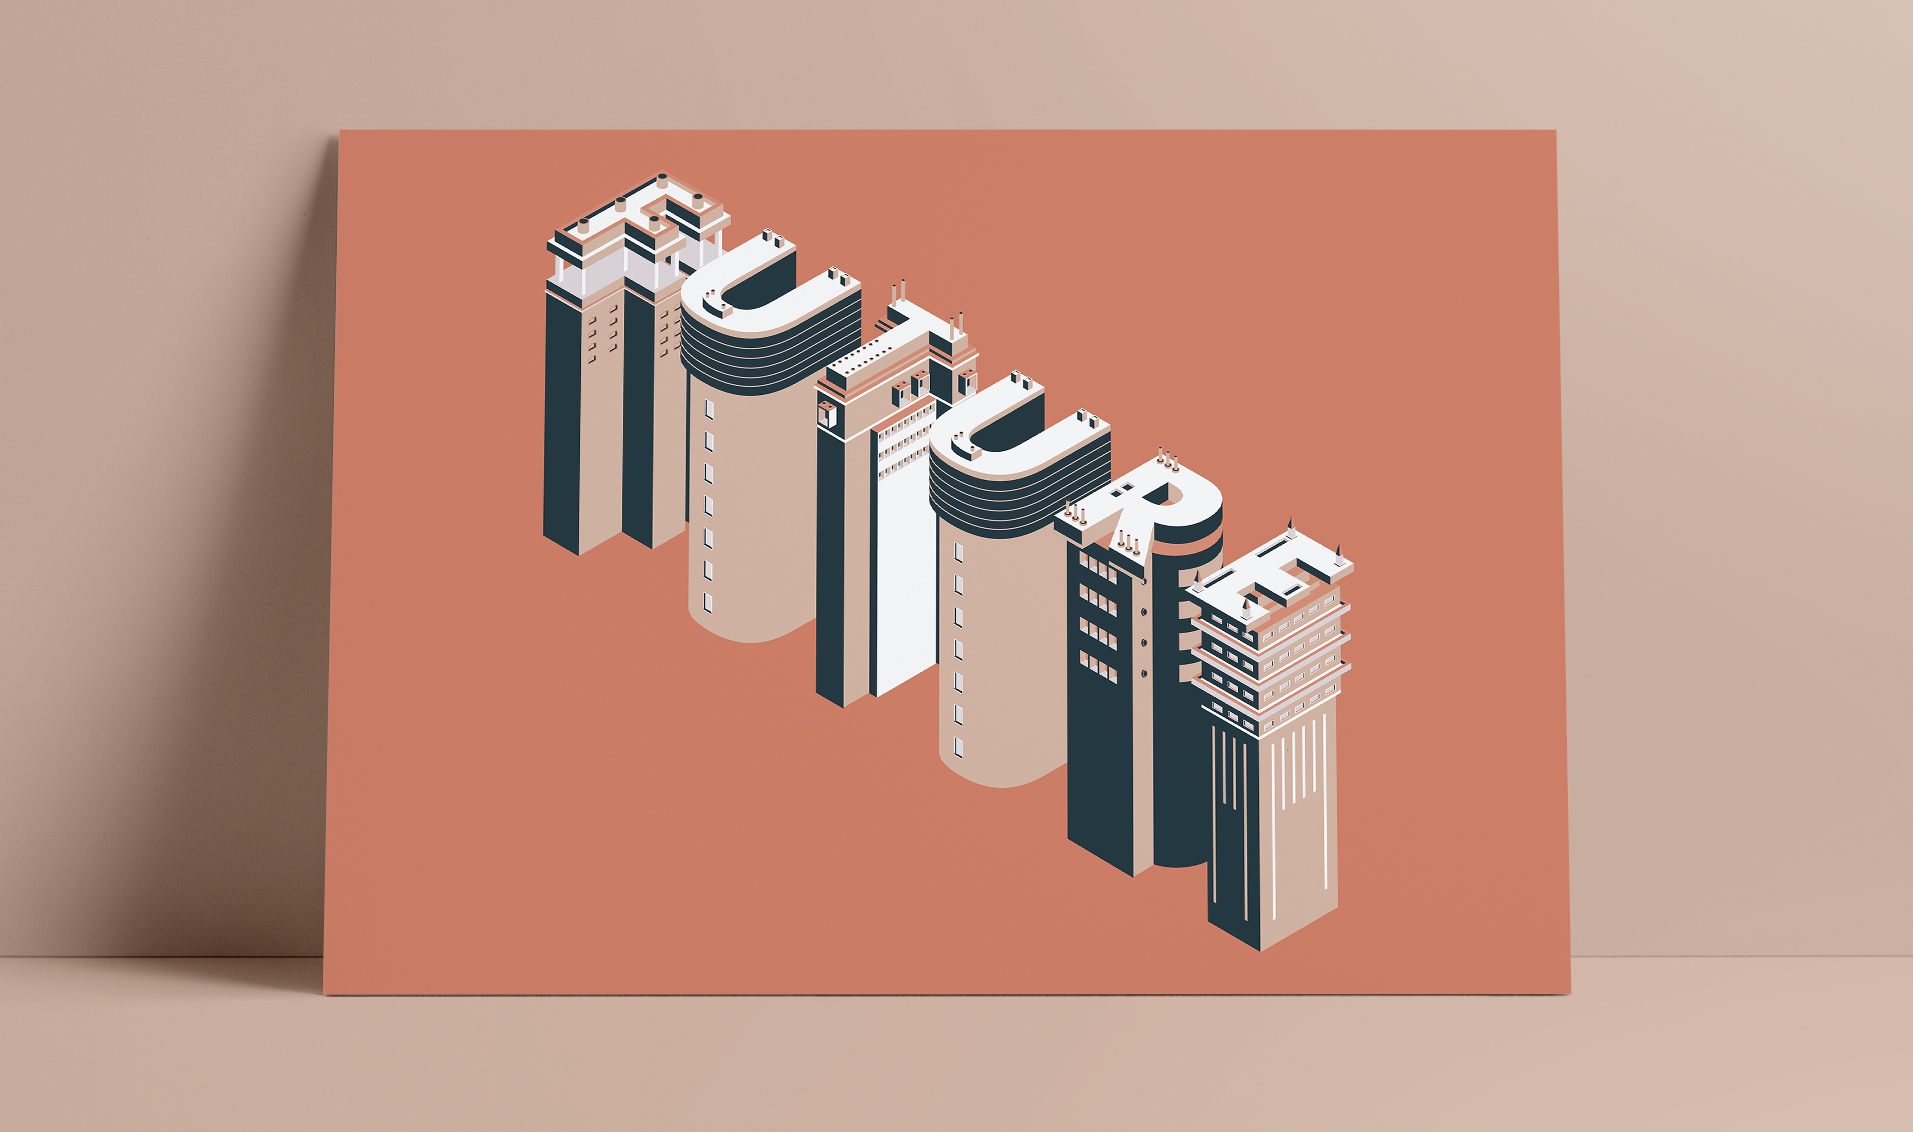 Isometric drawing of the word 'future' as buildings